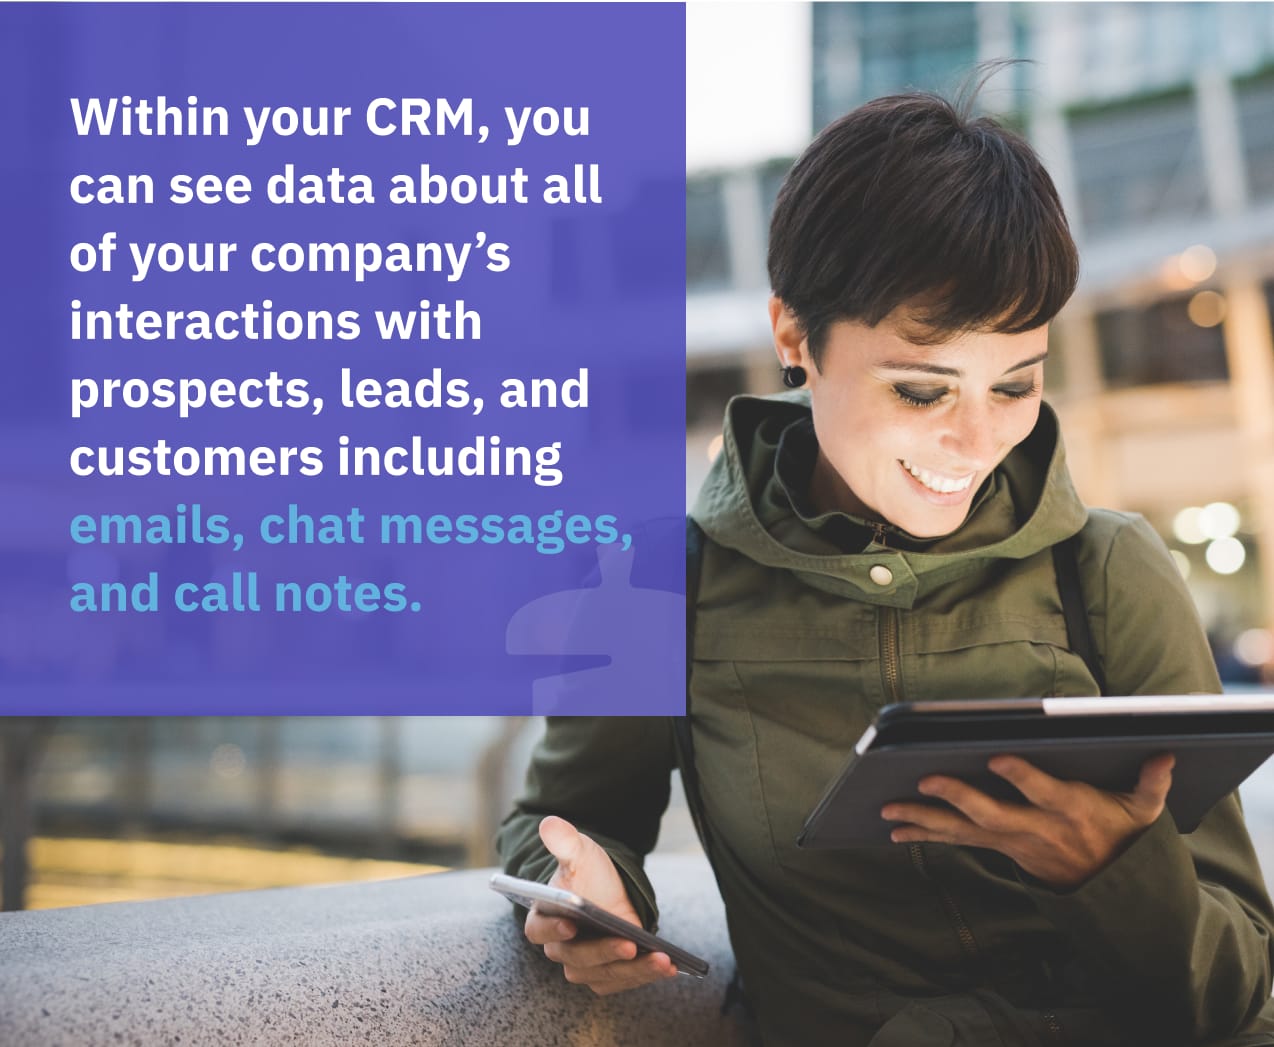 You can use your CRM to track emails, chats, and call notes